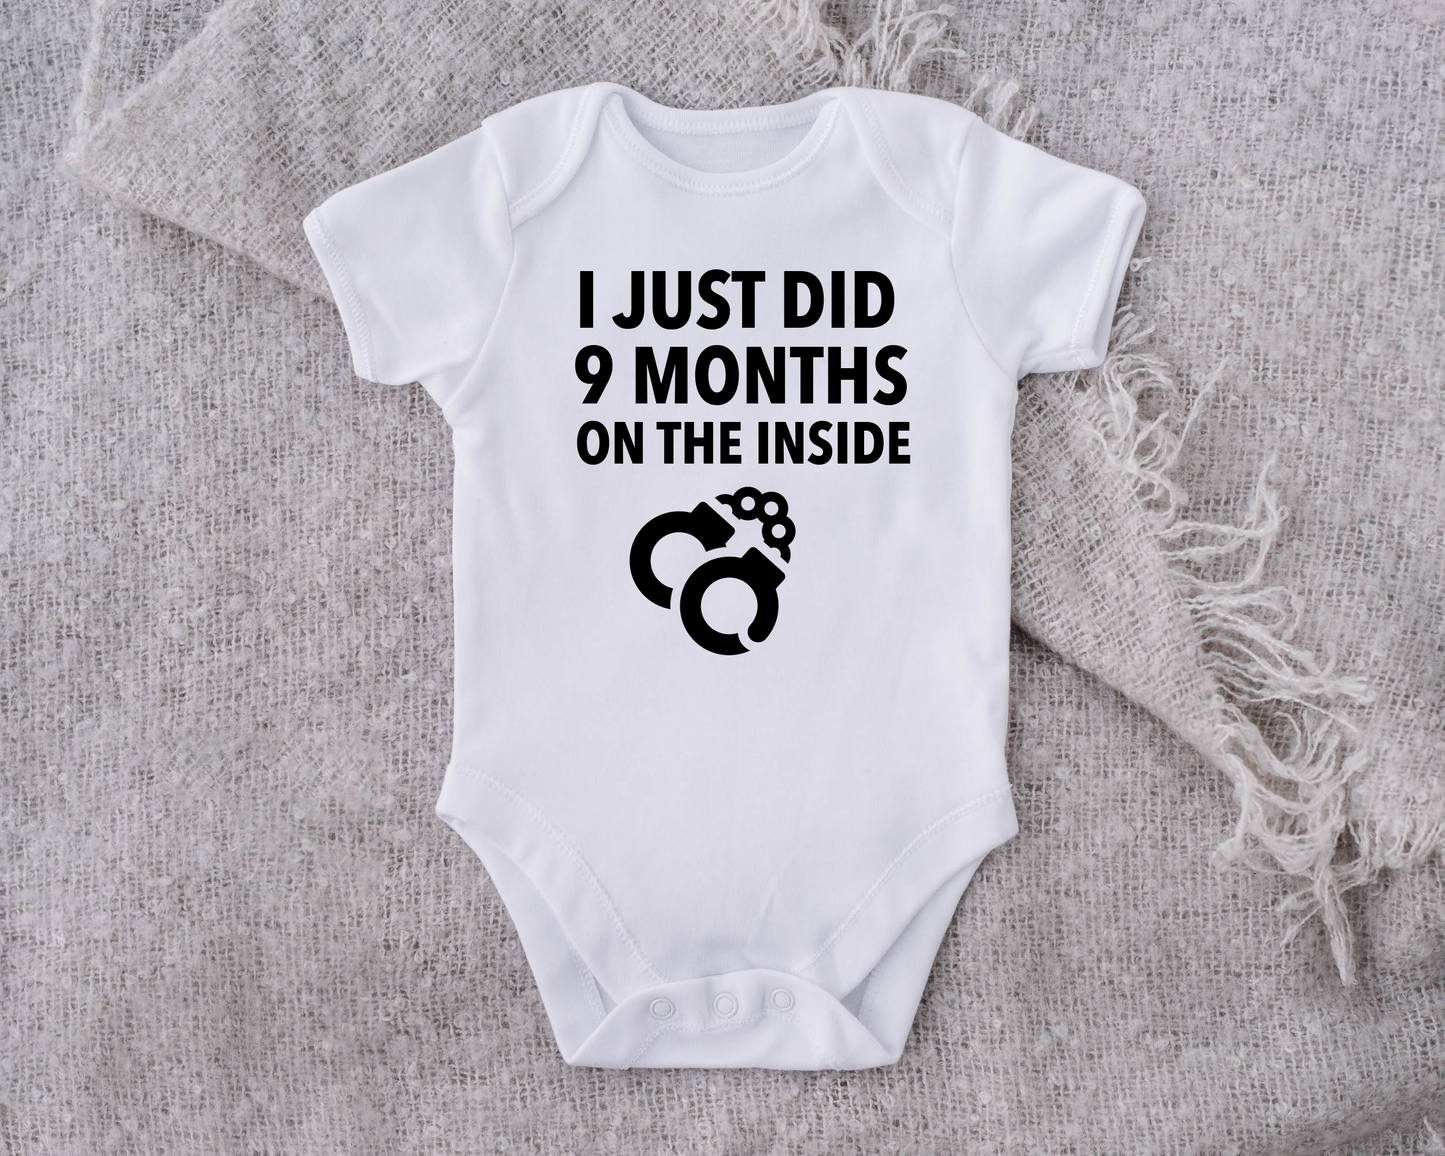 I Just Did 9 Months on the Inside | Funny Baby Onesie® Bodysuit